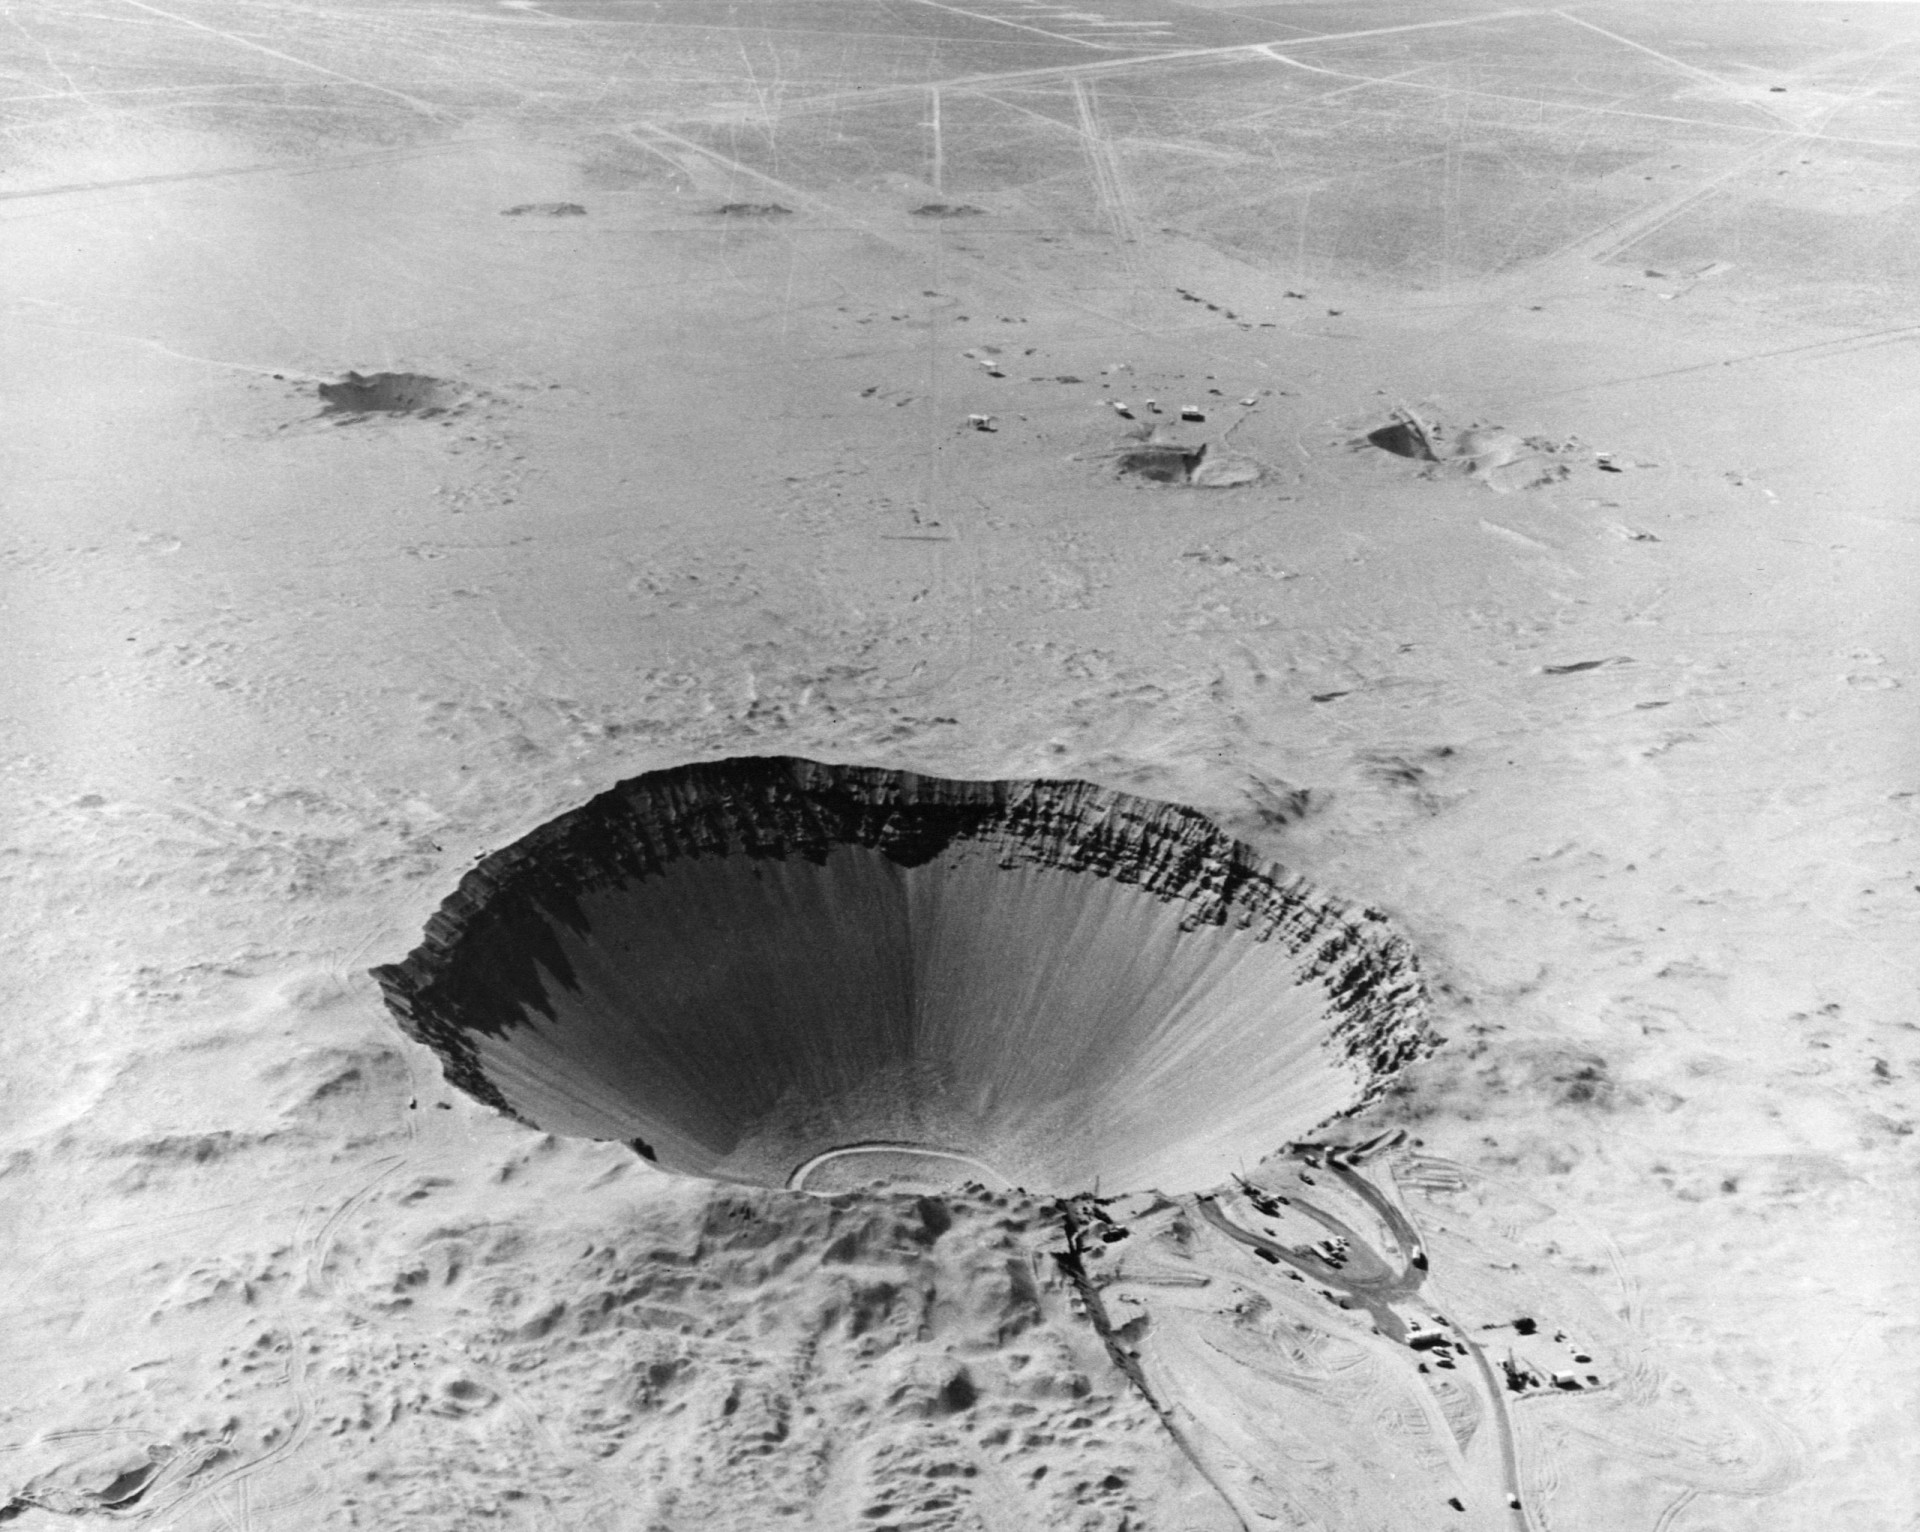 <p>The result of a massive underground nuclear test, the blast may have ended up irradiating more people than any other US nuclear test.</p><p><a href="https://www.msn.com/en-us/community/channel/vid-7xx8mnucu55yw63we9va2gwr7uihbxwc68fxqp25x6tg4ftibpra?cvid=94631541bc0f4f89bfd59158d696ad7e">Follow us and access great exclusive content every day</a></p>